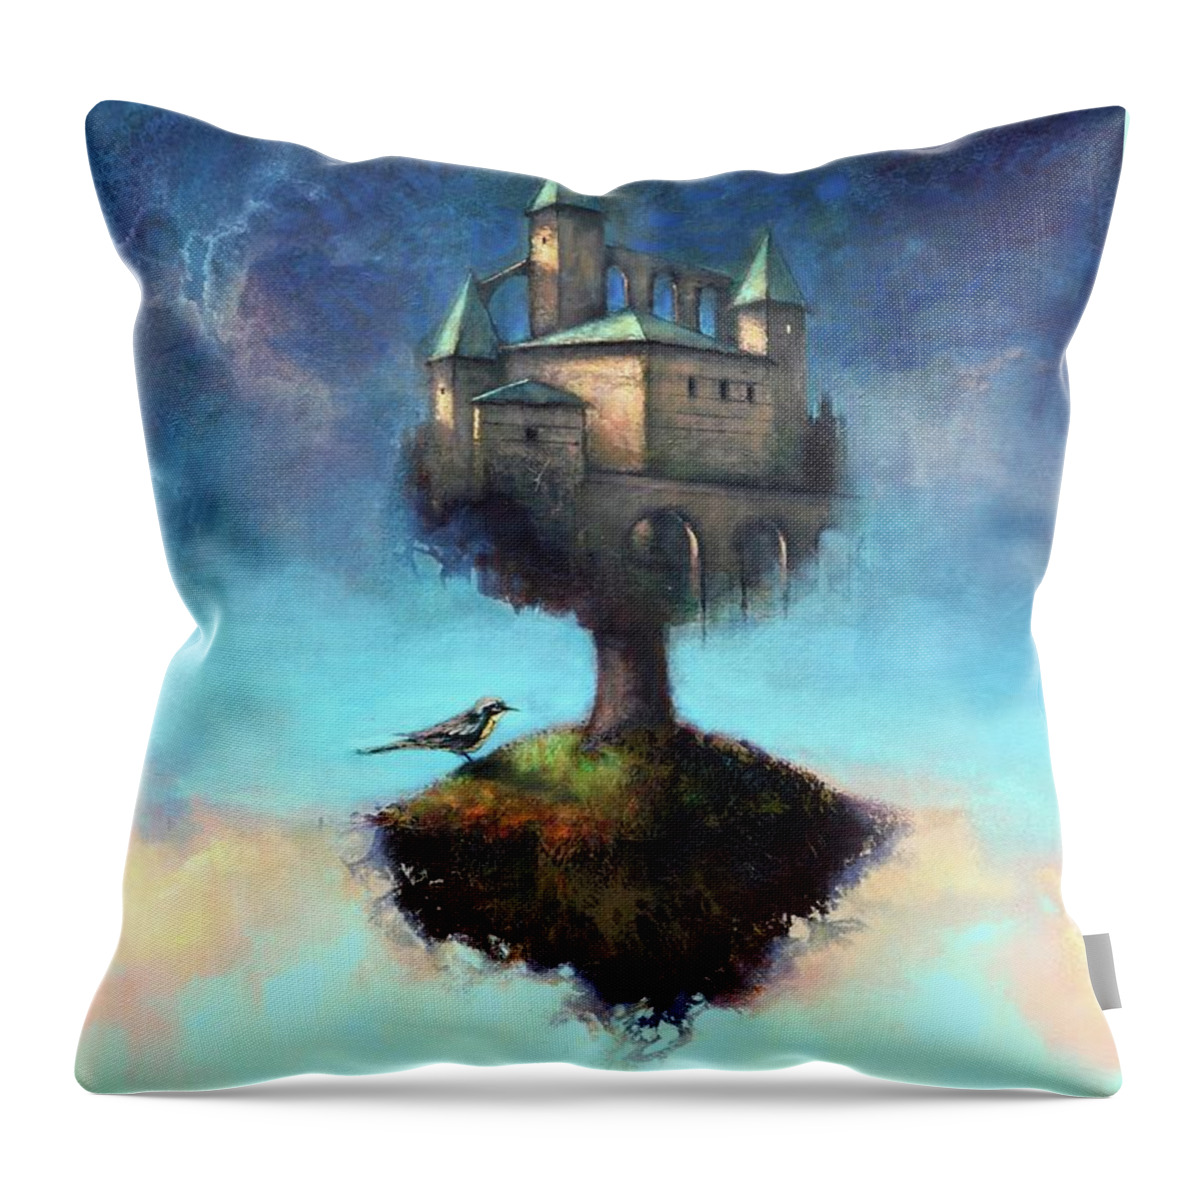 Sky Throw Pillow featuring the painting The Axiom Of Always by Joshua Smith